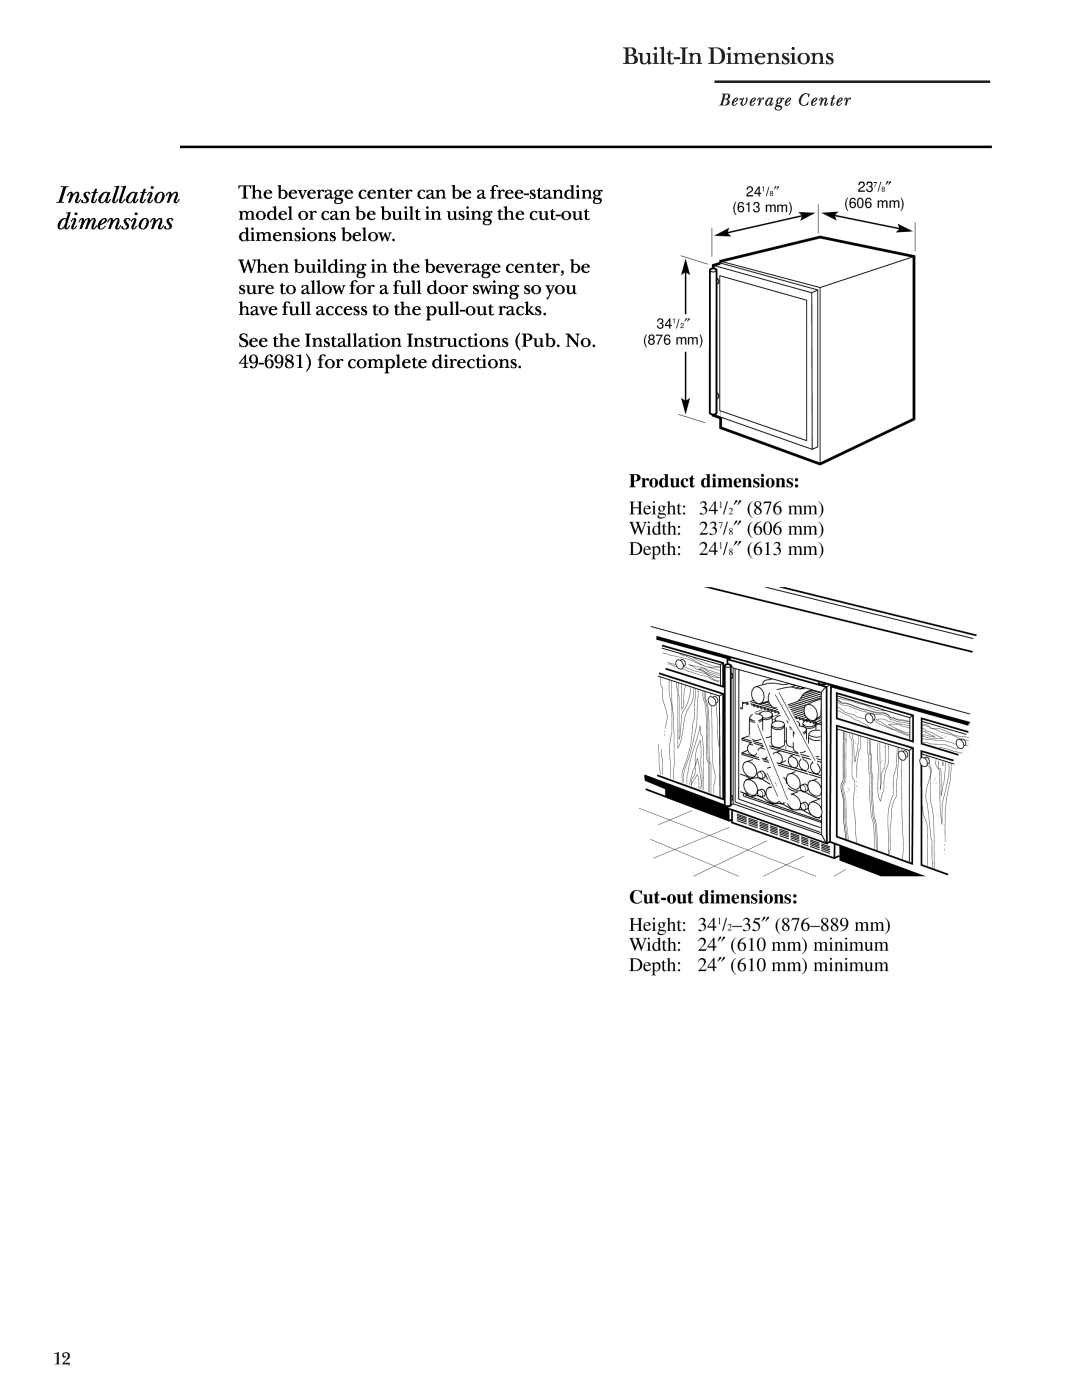 GE Monogram ZDB24 manual Built-In Dimensions, Installation dimensions, Product dimensions, Cut-out dimensions 